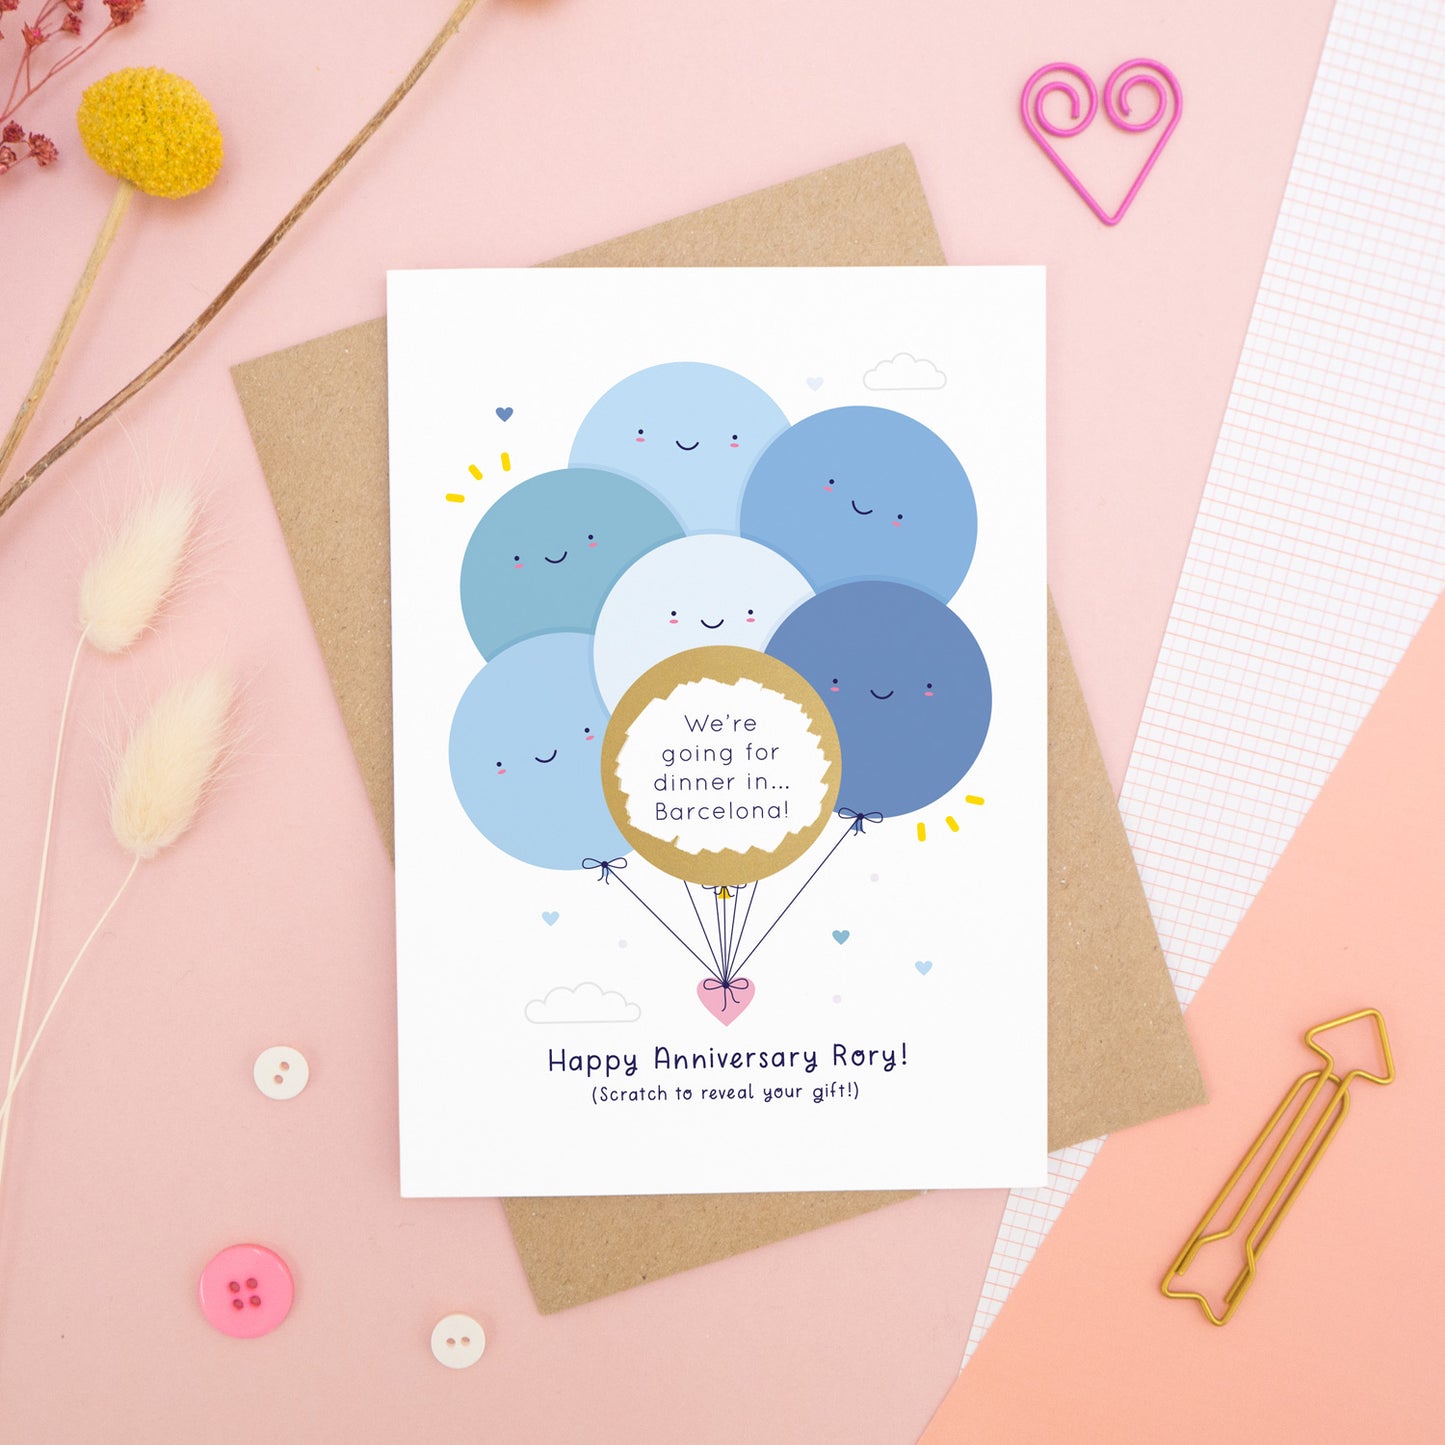 A personalised anniversary scratch card photographed on a pink background with floral props, paper clips, and buttons. This card shows the blue colour scheme and the golden circle has been scratched off to reveal the secret message!